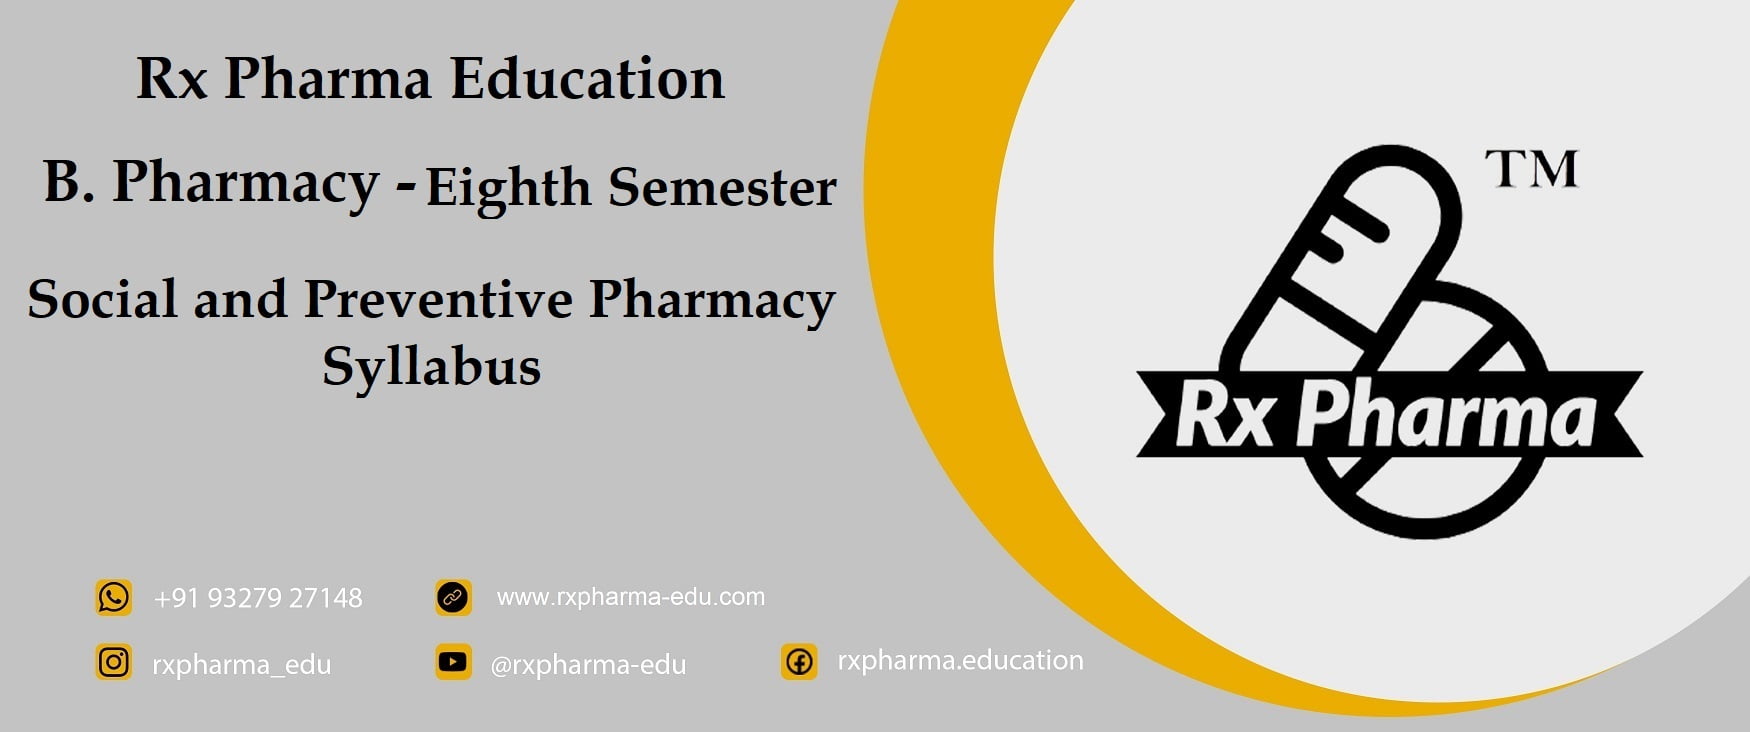 Social and Preventive Pharmacy Syllabus Banner